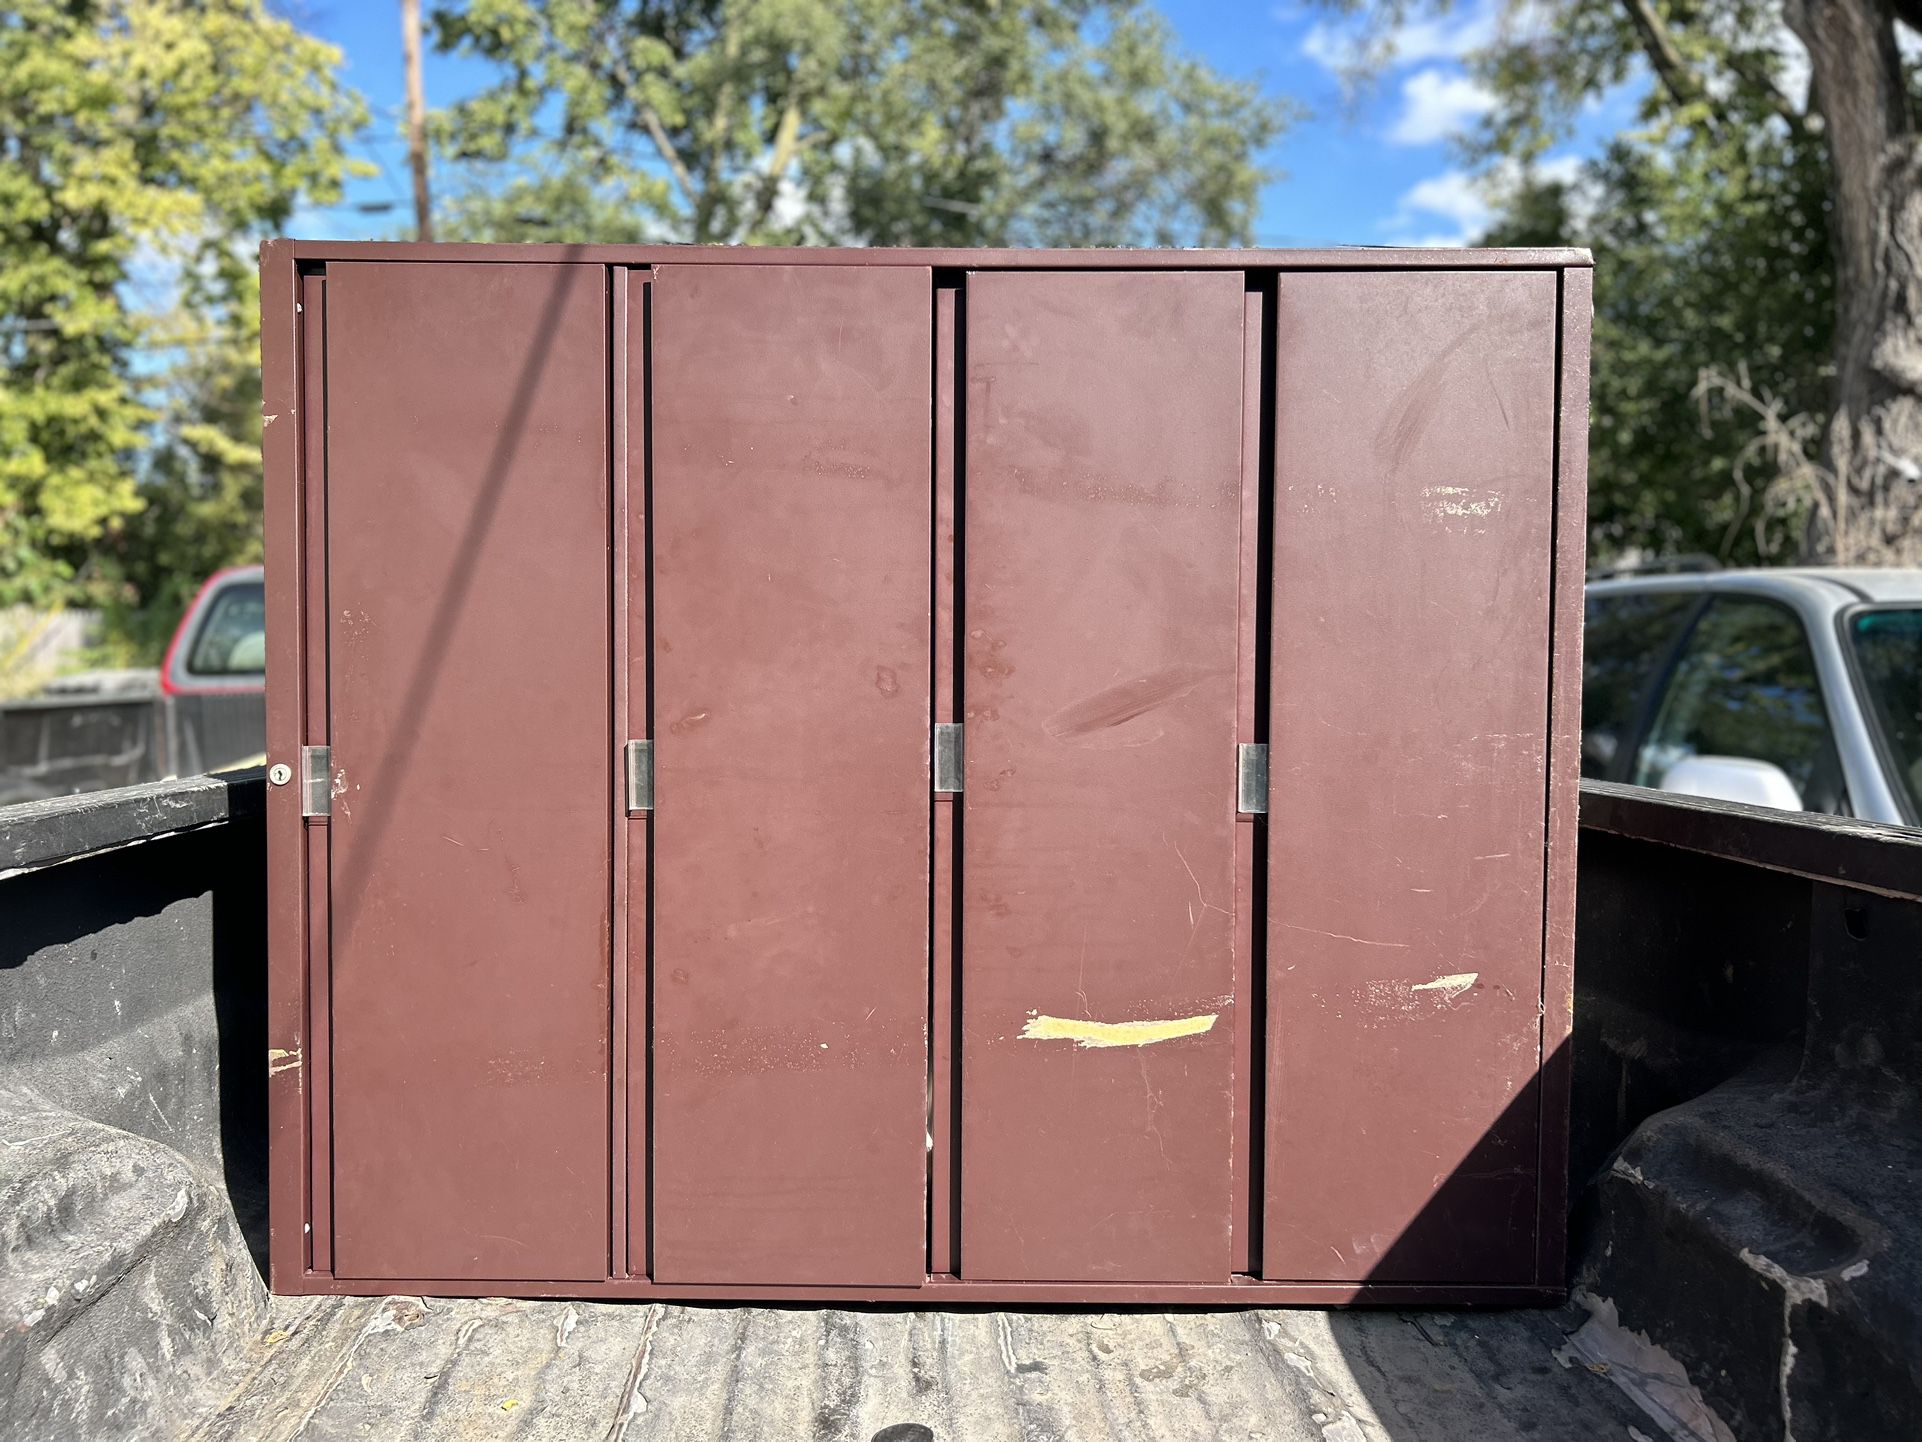 3 LARGE Filing Cabinets 